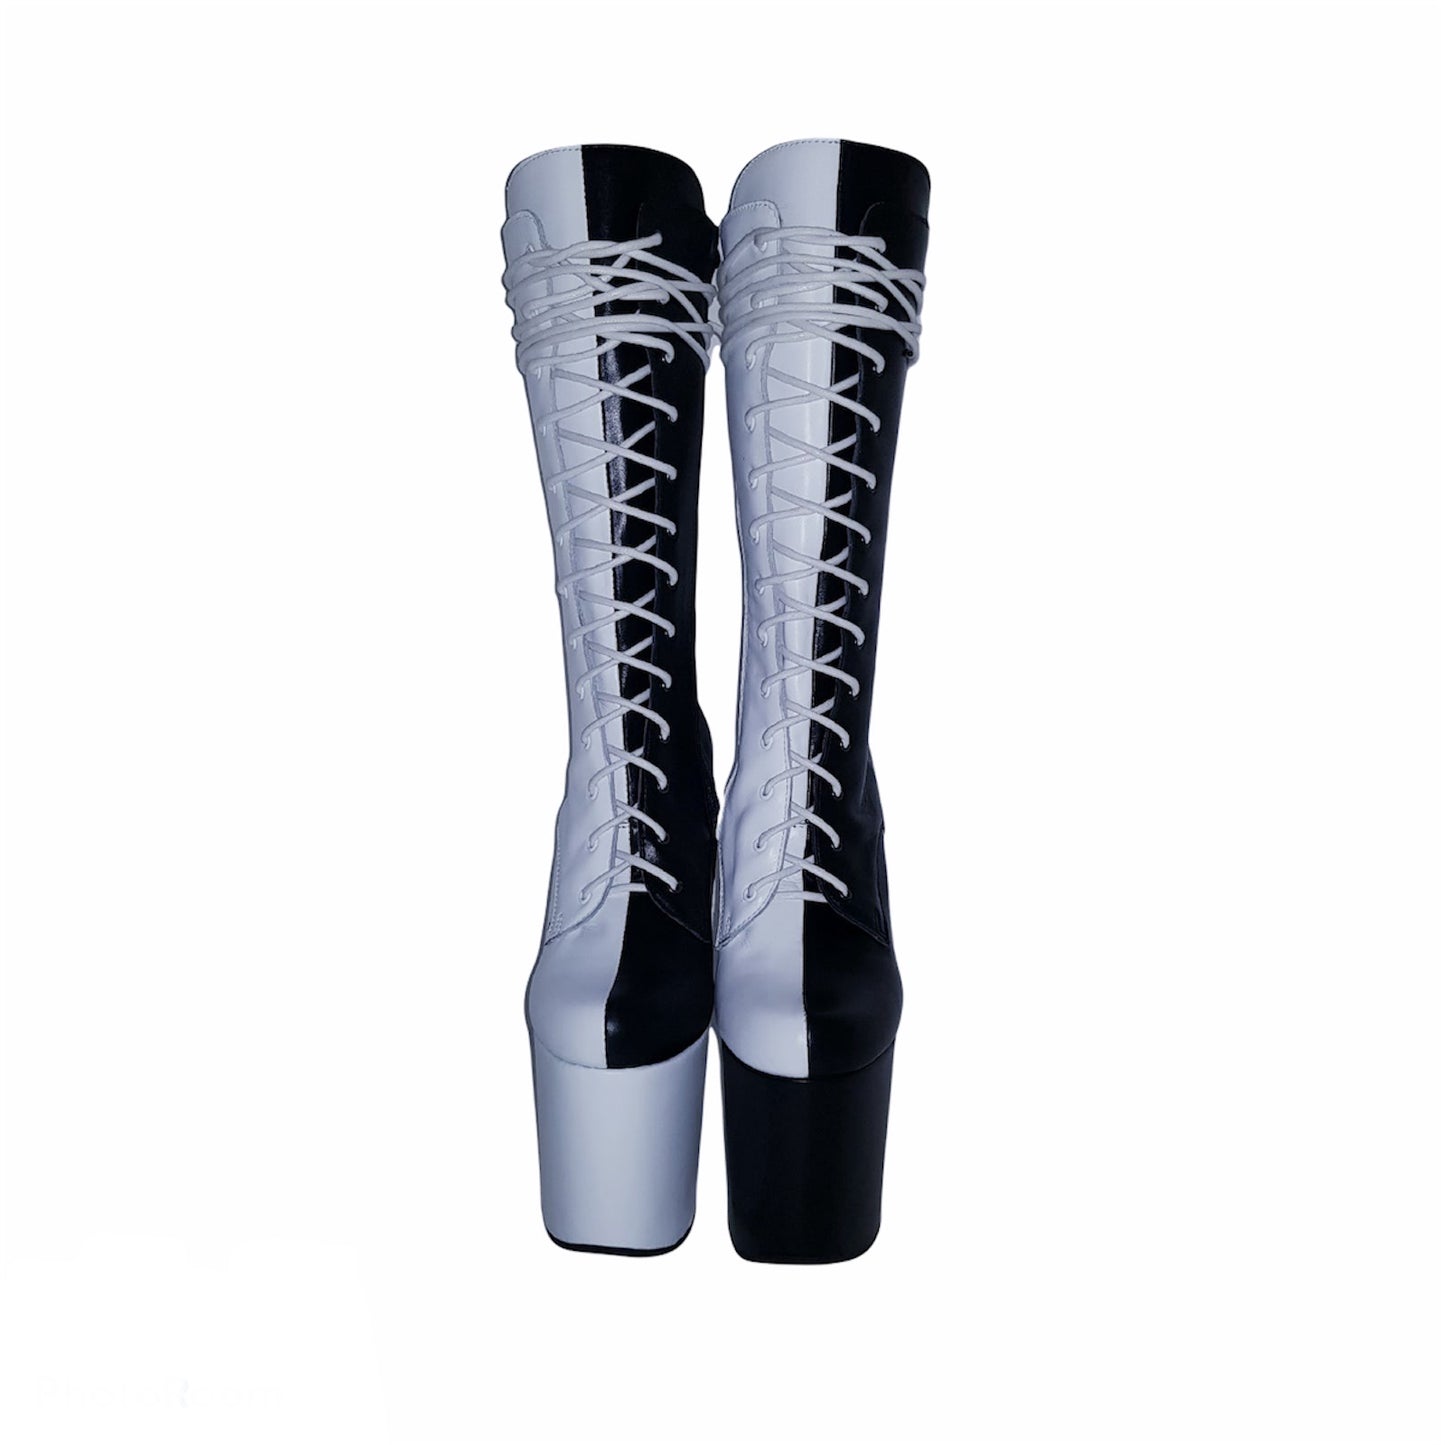 Black and white genuine leather ankle - mid calf boots